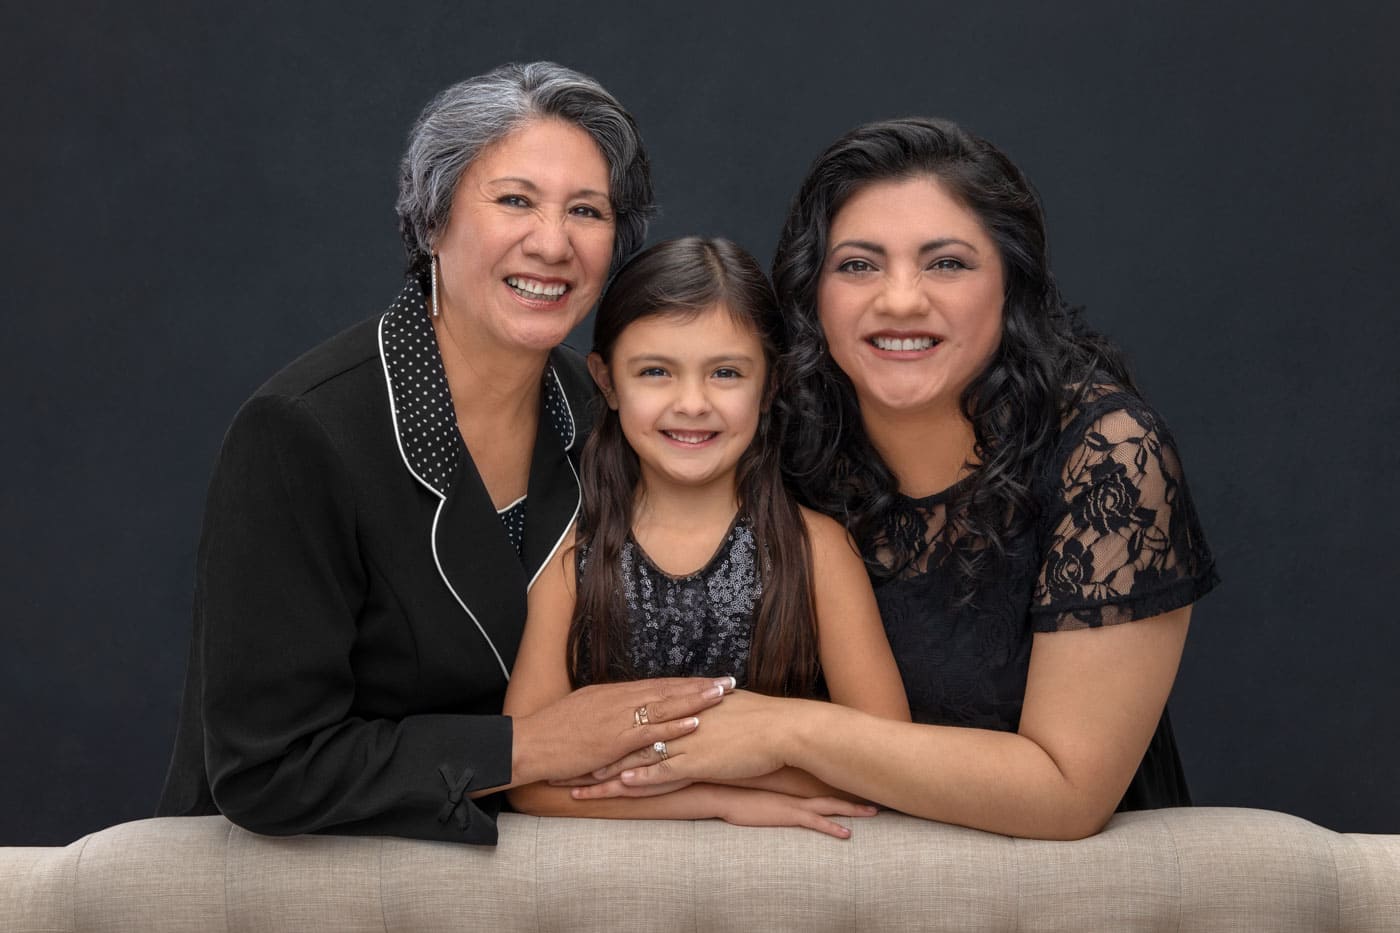 Beautiful generational portrait of smiling grandmother, mother and daughter. They are standing, leaning on the back of a couch with their hands placed on top of each other hand. All three are wearing black. Josh and Stefanie Fraley Family Portrait Photography.